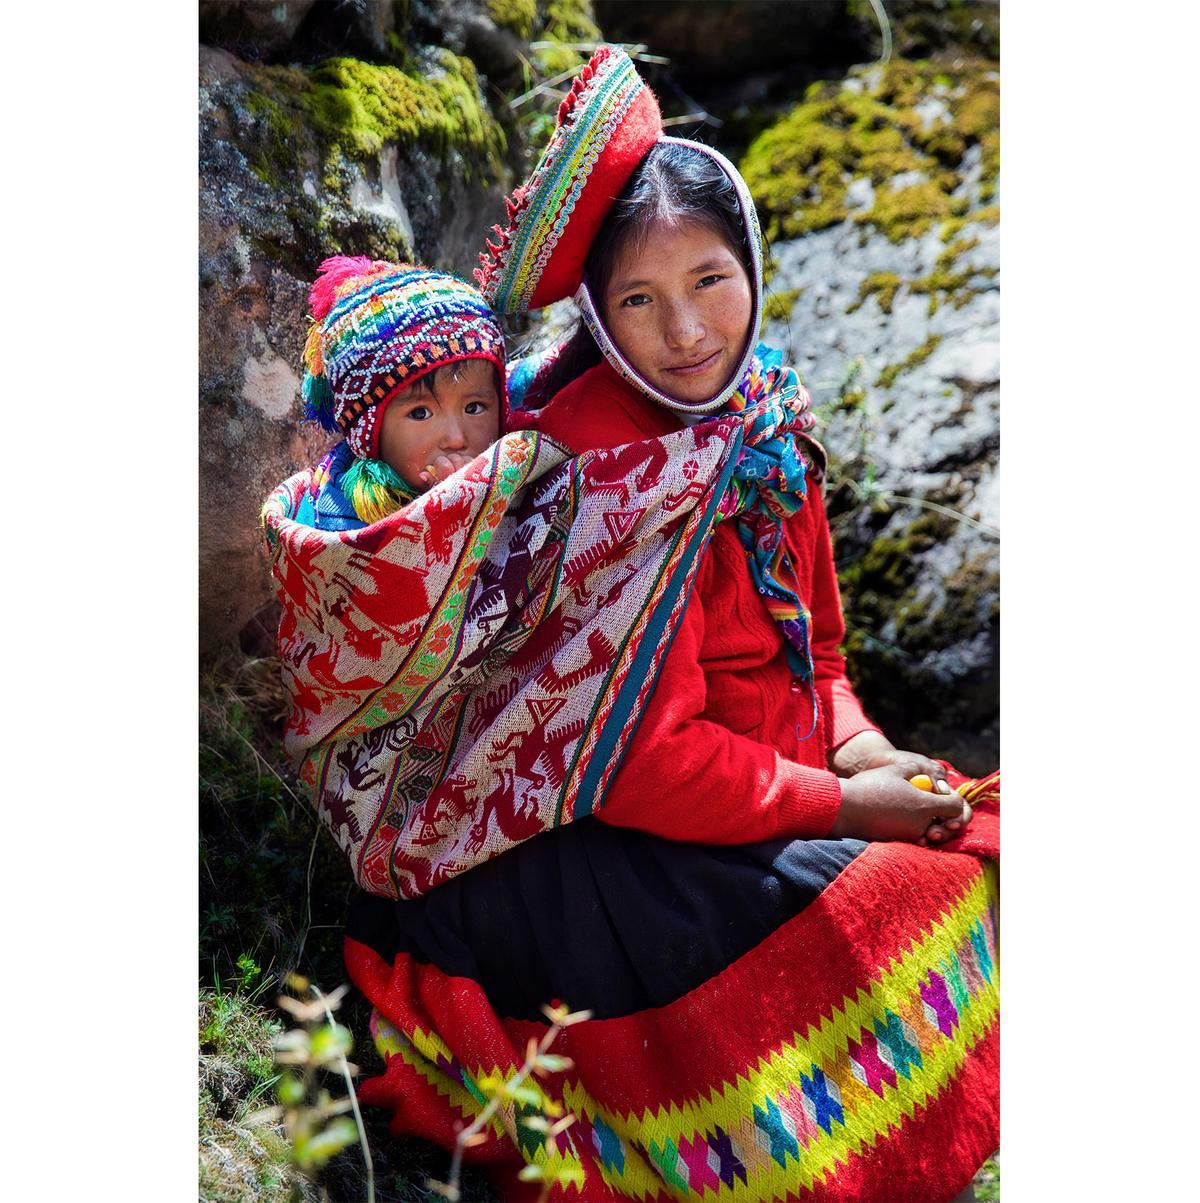 ANDES MOUNTAINS, PERU, "Juliana and her son Alex" (Courtesy of <a href="https://theatlasofbeauty.com/">Mihaela Noroc</a>)